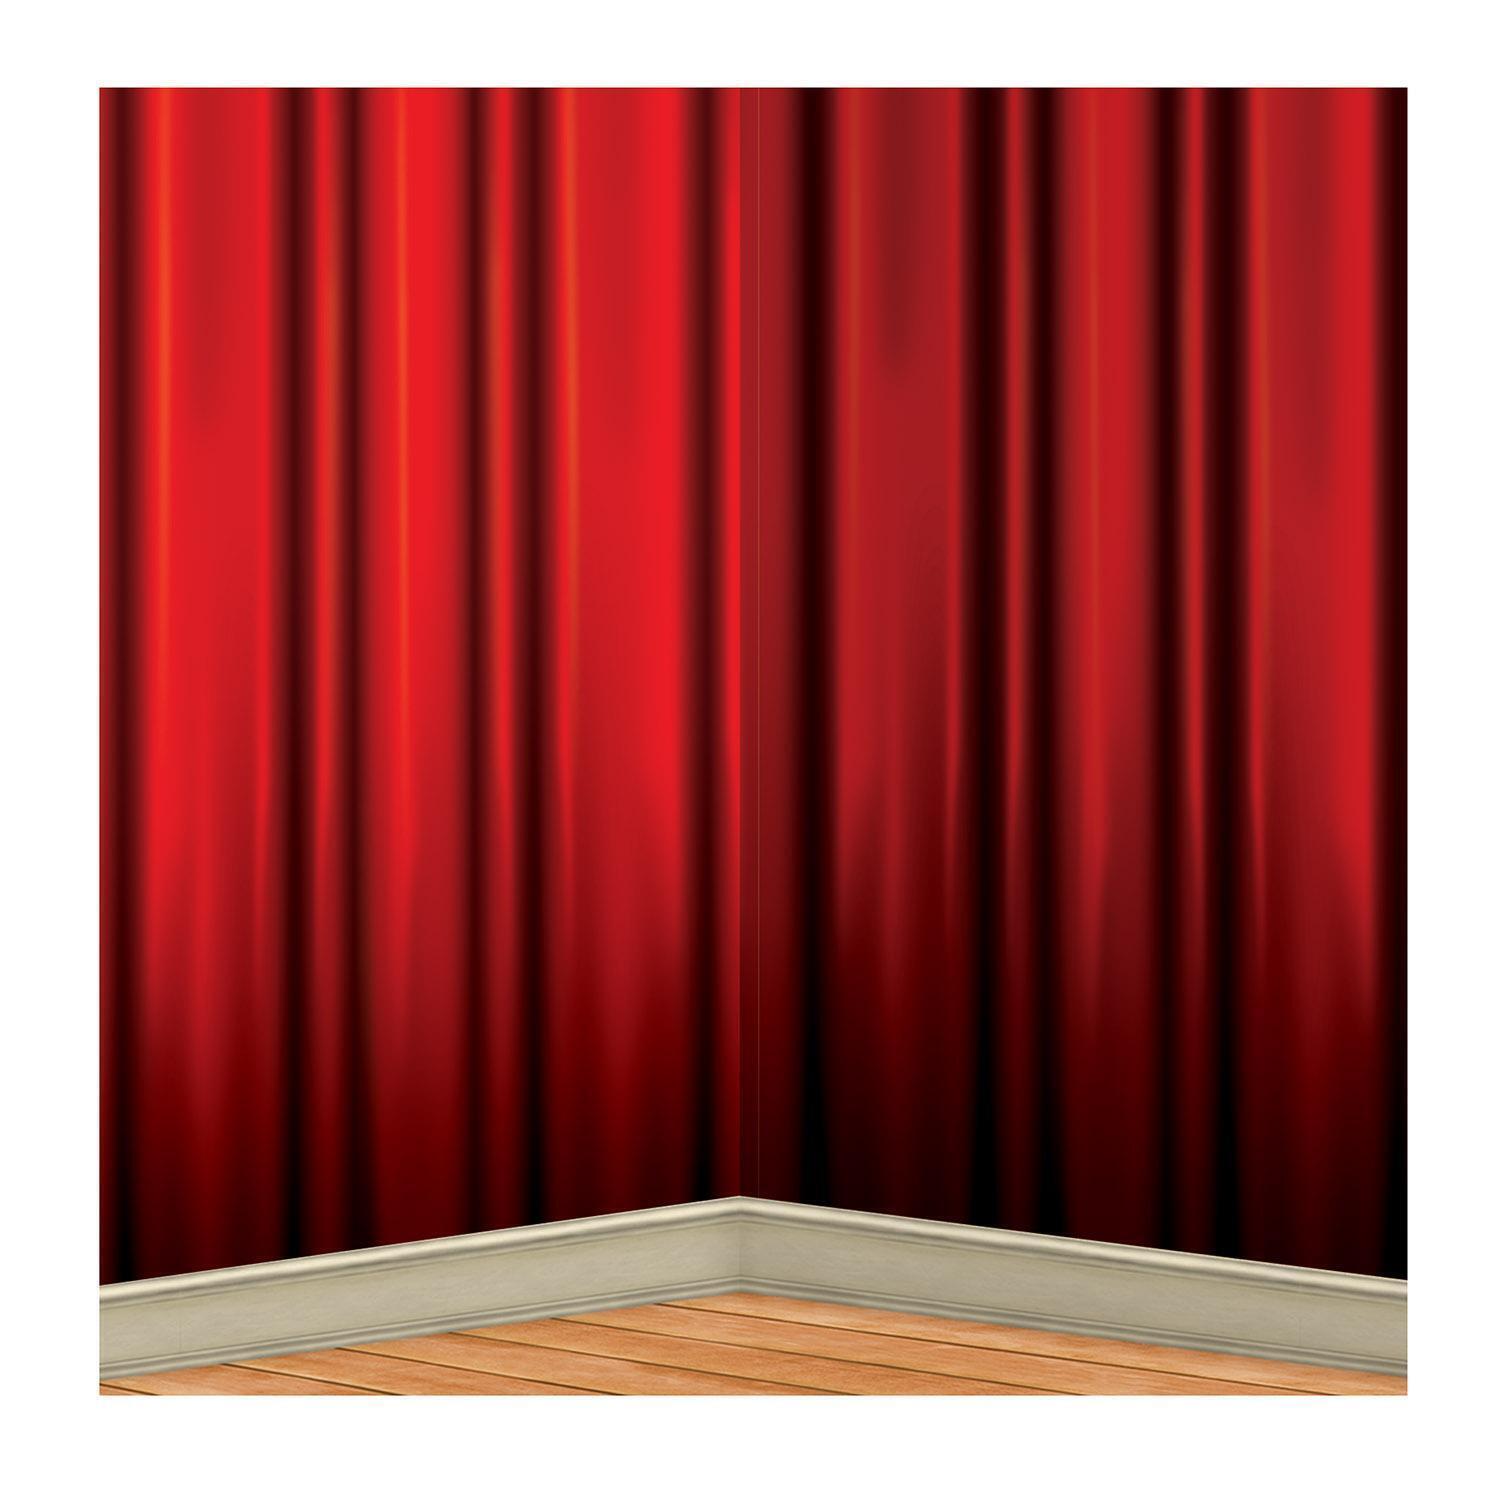 Set of 6 Red Hollywood Awards Night Curtain Backdrops 4' x 30'